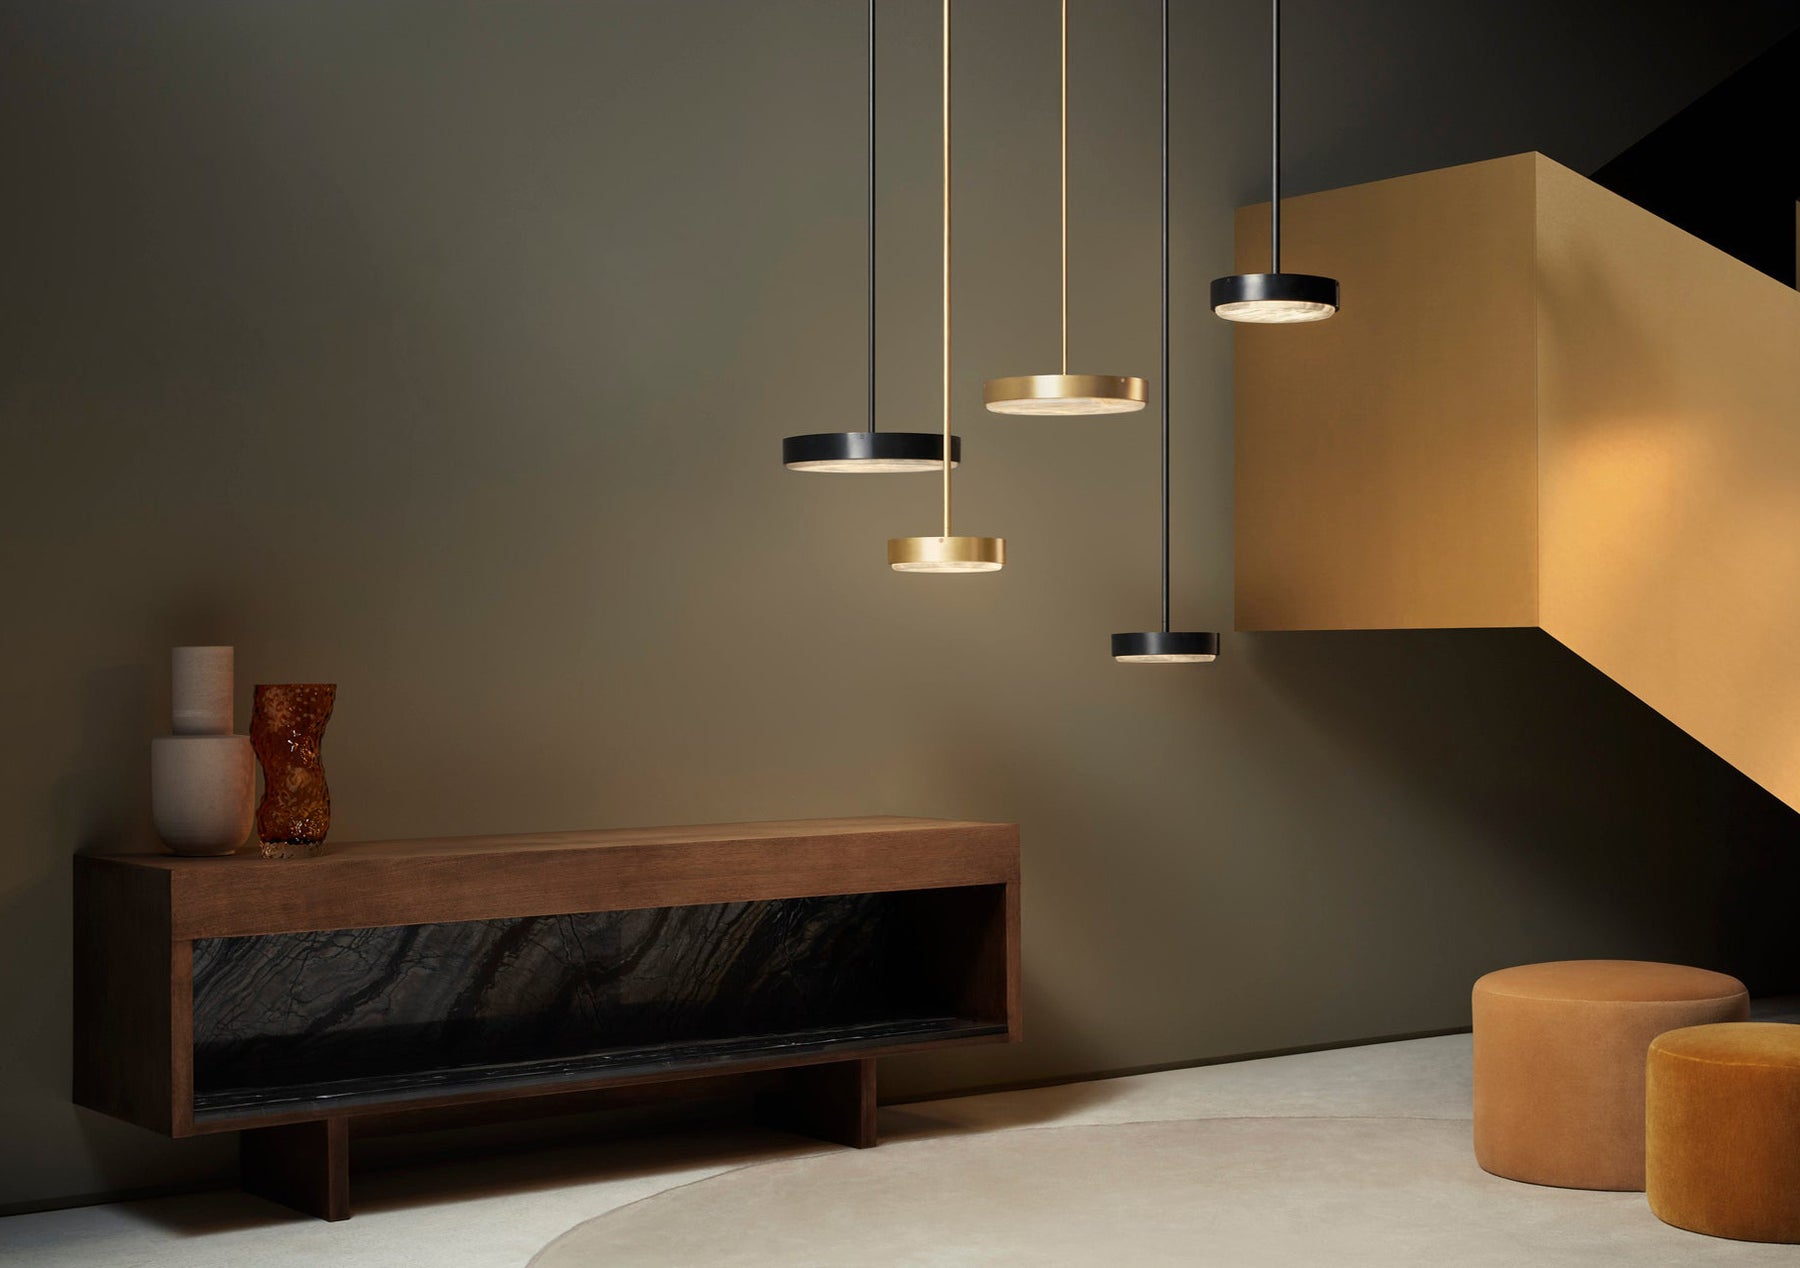 Anvers Small Pendant Lamp In Bronze With Honed Alabaster (Quick Ship)